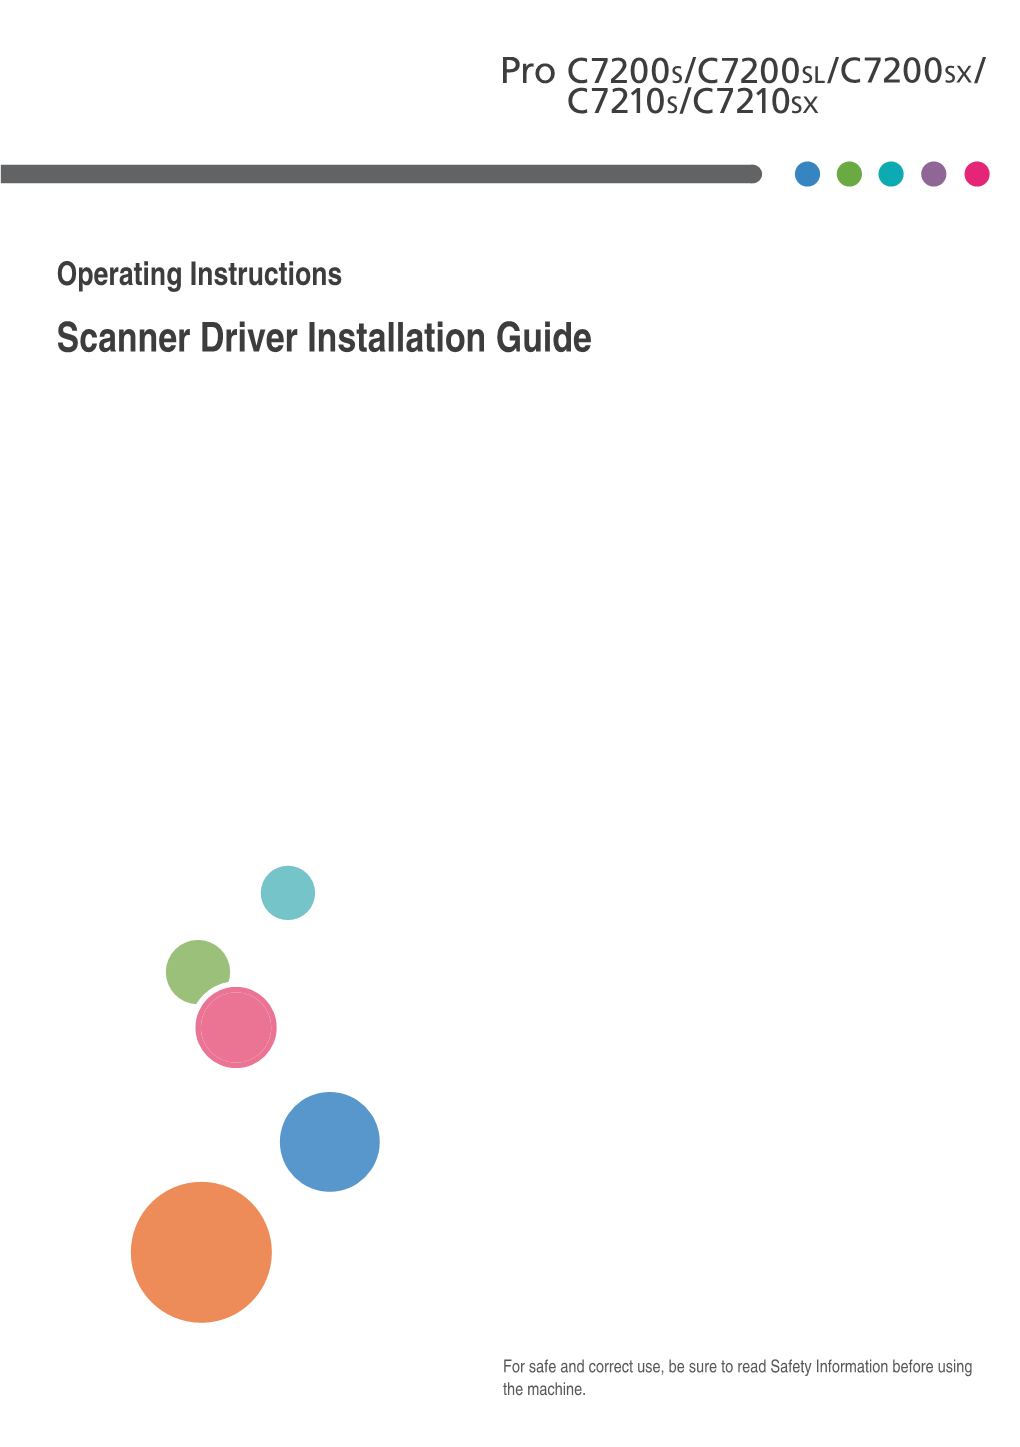 Operating Instructions Scanner Driver Installation Guide